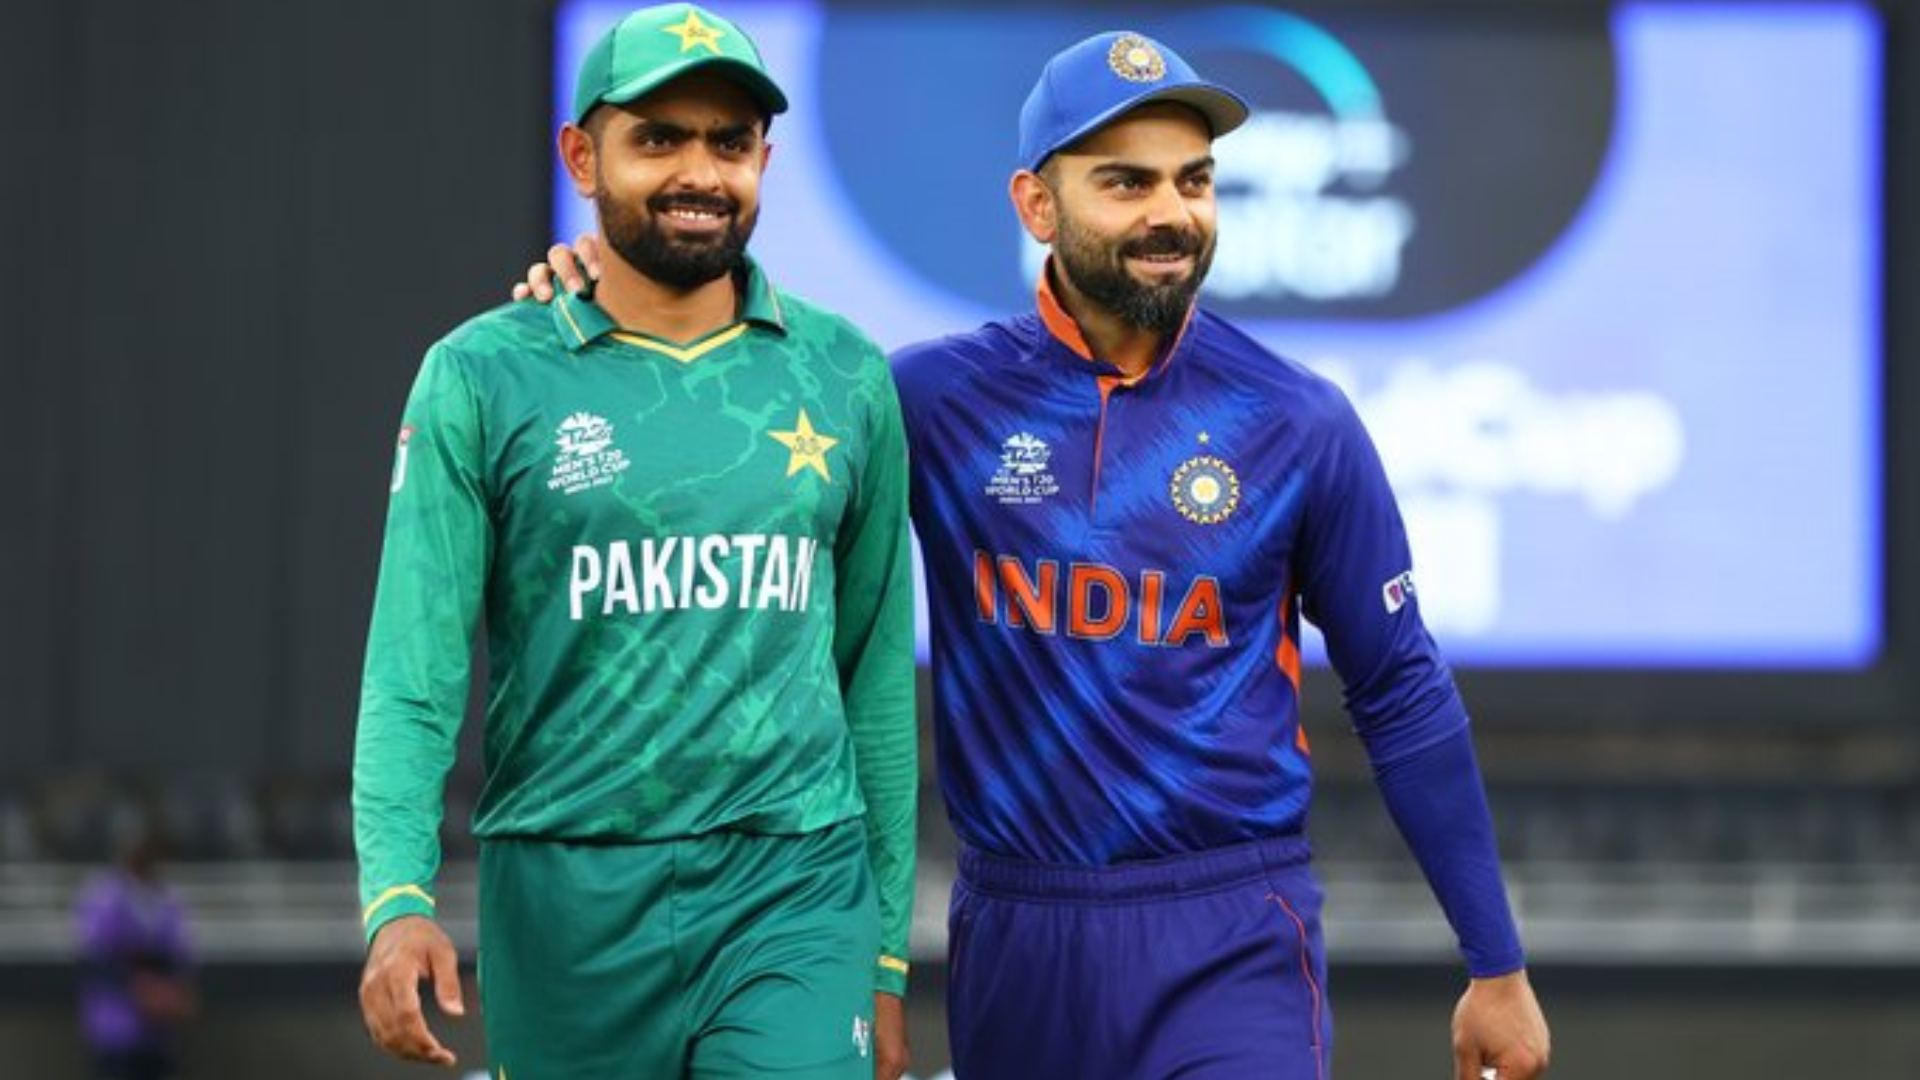 ICC World T20 2022 Full Schedule Here, India vs Pakistan on October 23